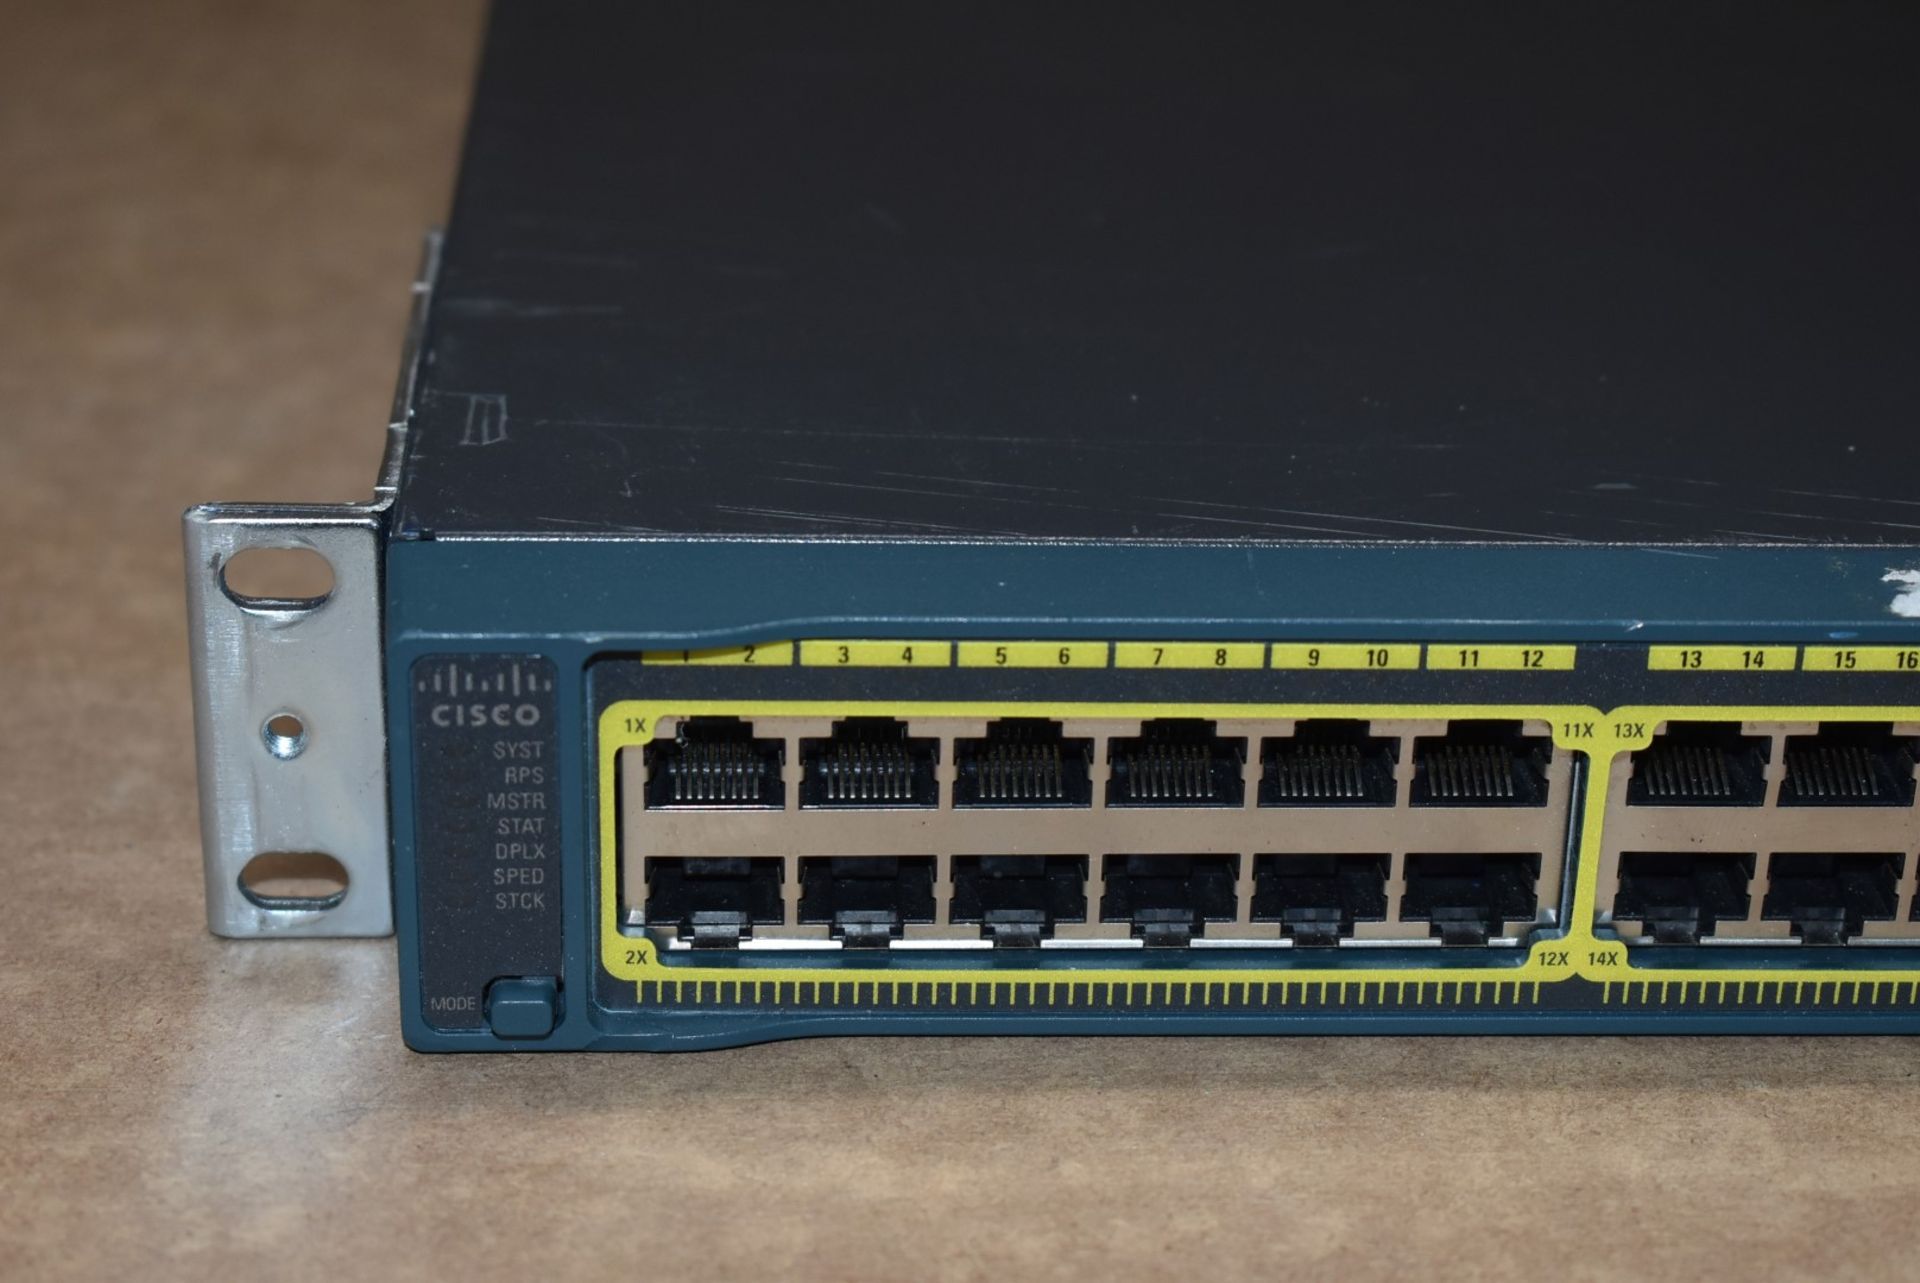 1 x Cisco Catalyst 2960S 48 Port Switch - Includes Power Cable - Ref: MPC114 CA - CL678 - - Image 4 of 6